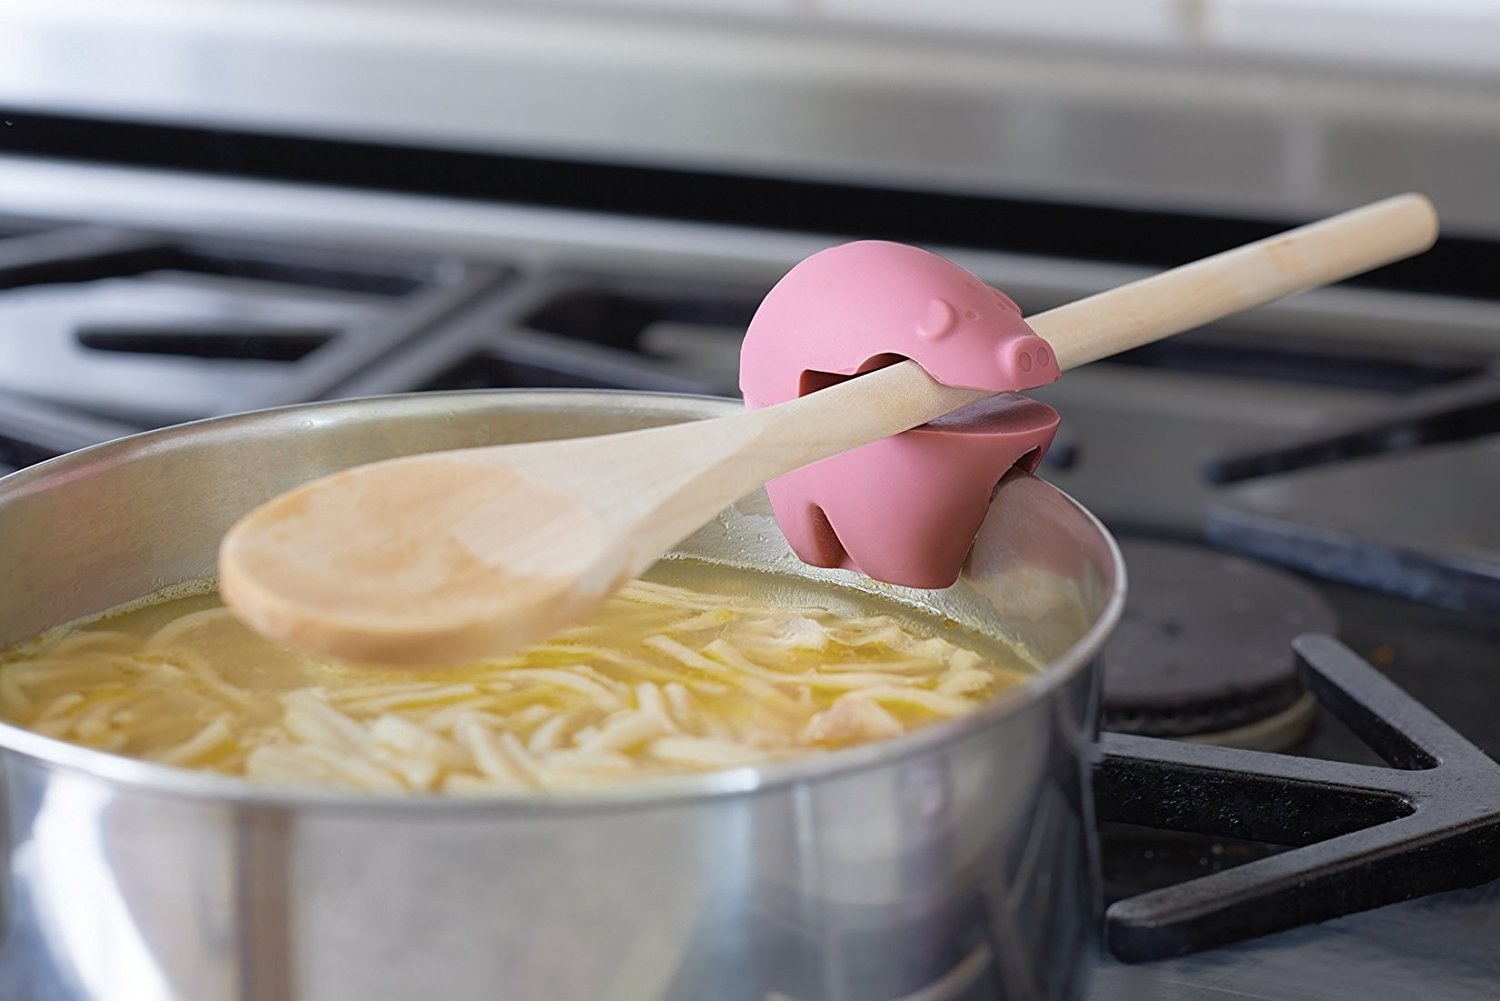 Kitchen Gadgets - great quirky gift ideas (16) - Life At The Zoo